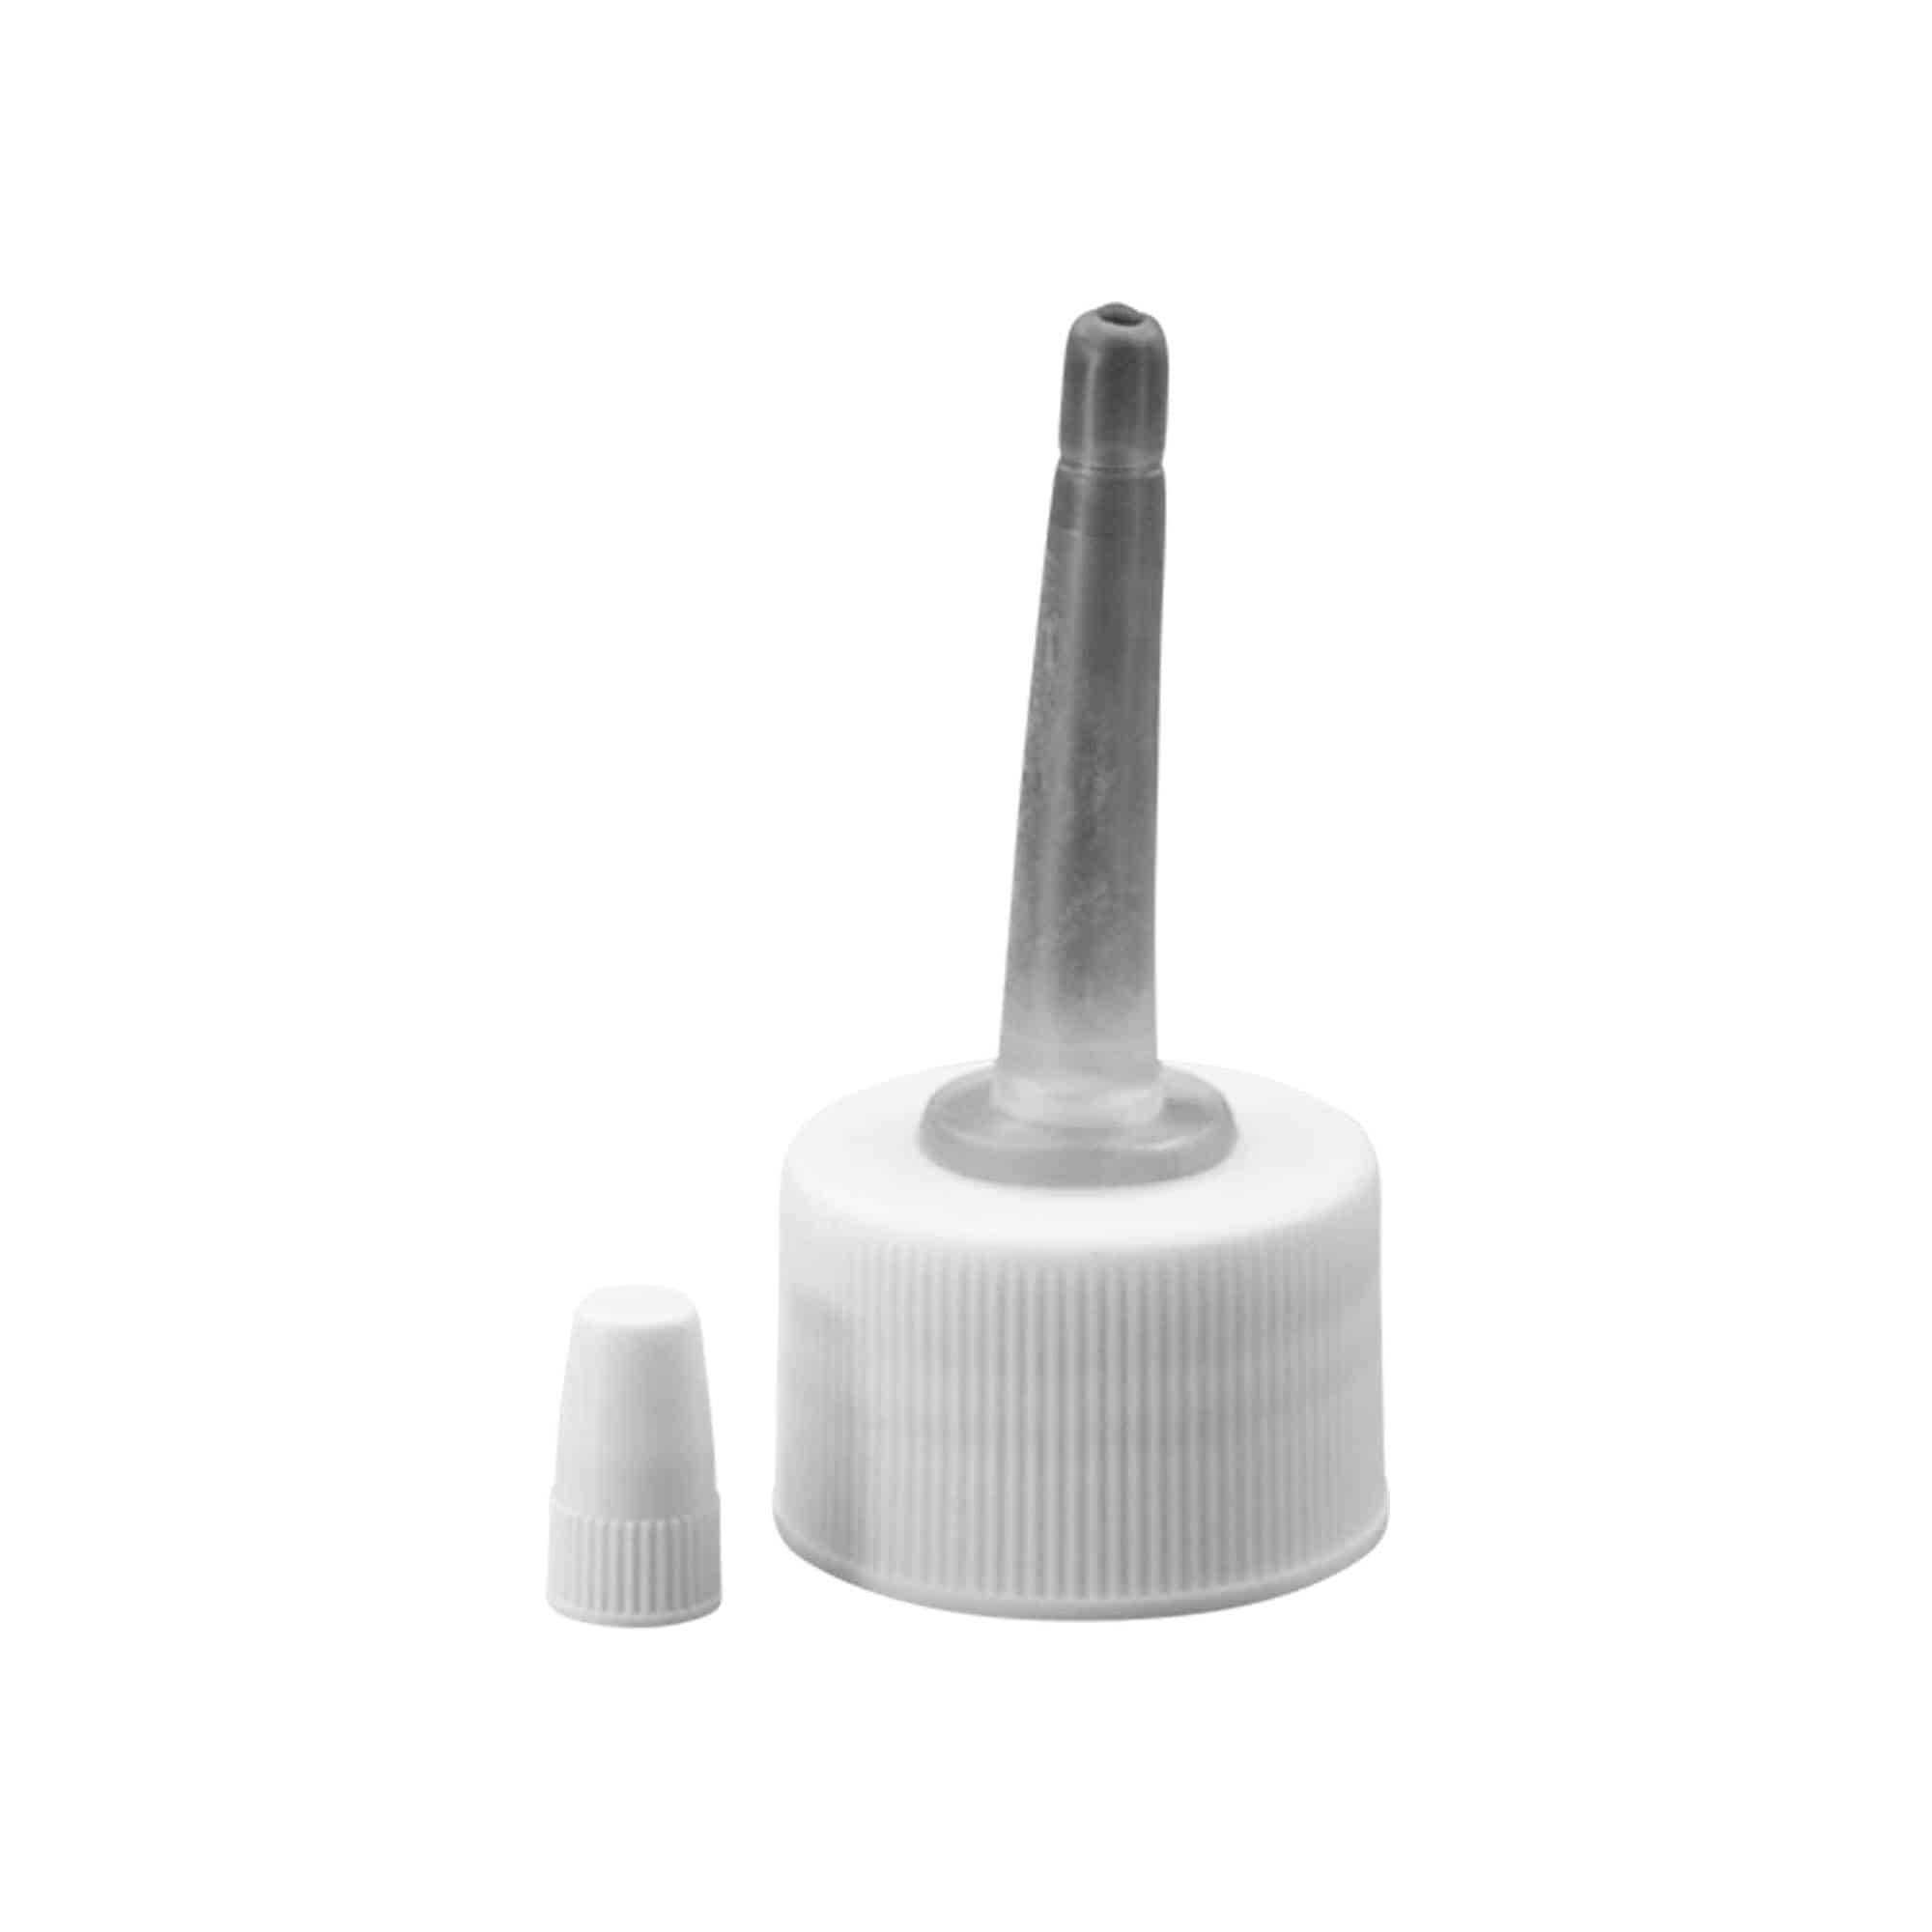 Screw cap with applicator, PP plastic, white, for opening: GPI 24/410